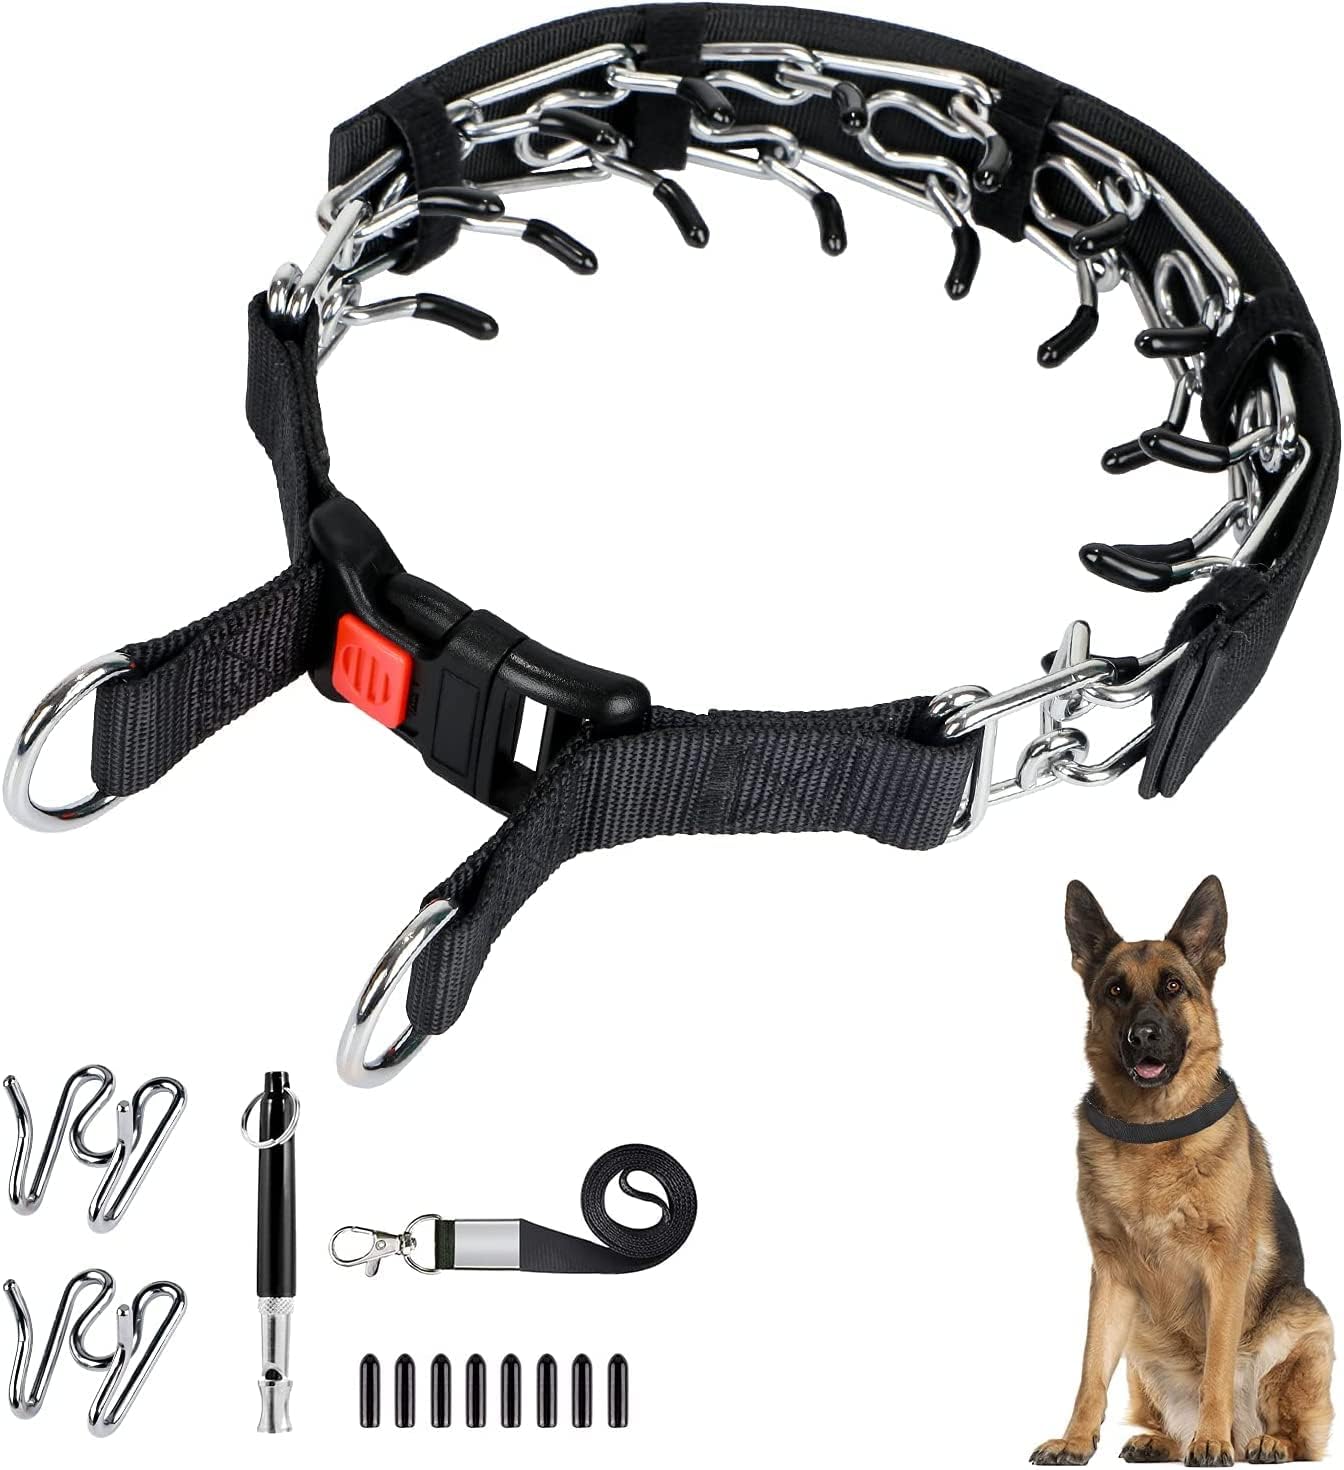 Dog Prong Traing Collar, Choke Pinch Collar for Dogs [2 Extra Links][Dog Whistle][Cover] with Snap Buckle and Rubber Caps, No Pull Dog Collar for Medium Large Breed Dogs [Medium]